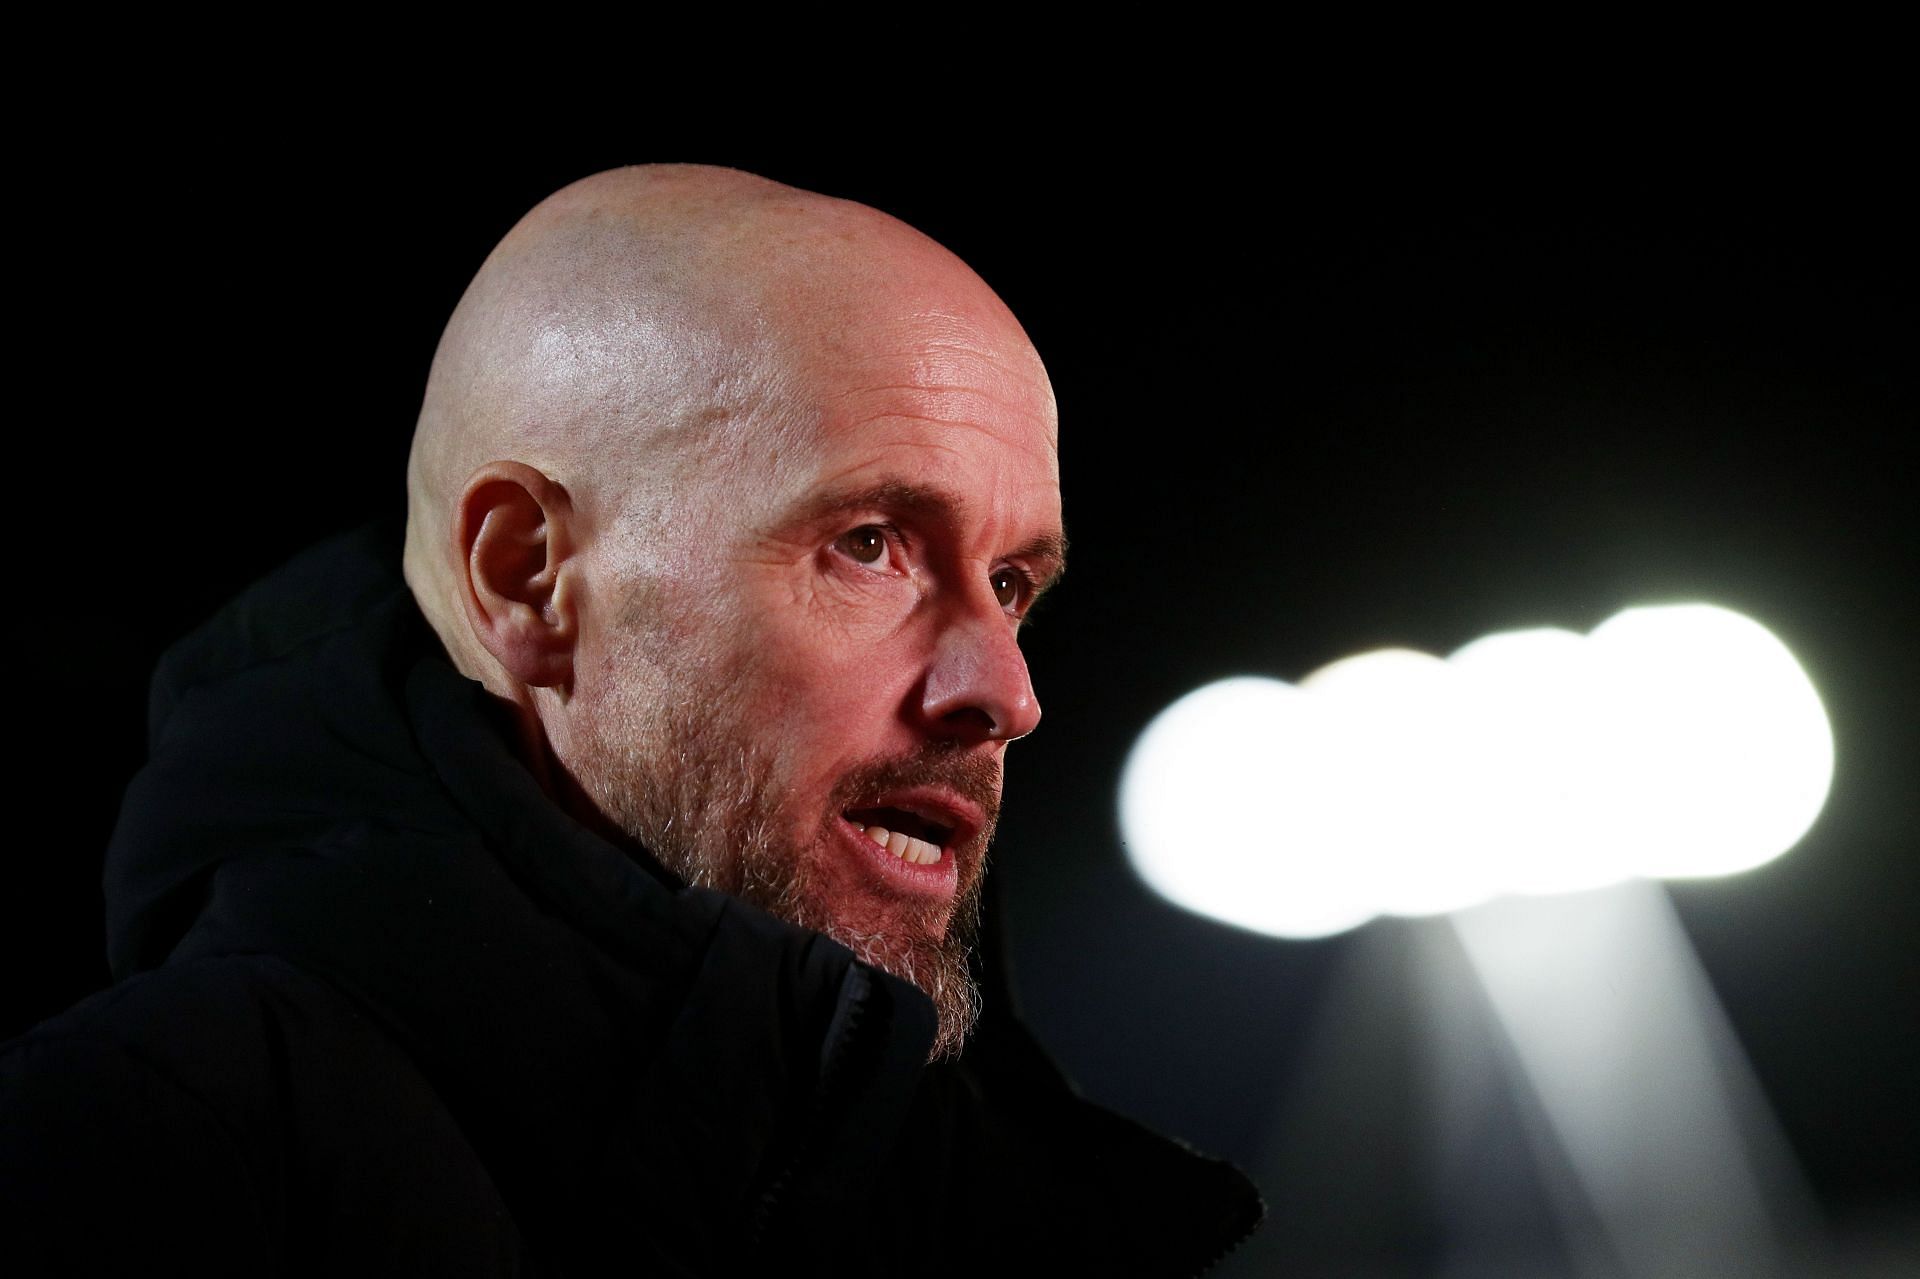 “This is not the standard of top football” - Erik ten Hag laments Manchester United display after pre-season friendly loss to Rosenborg 